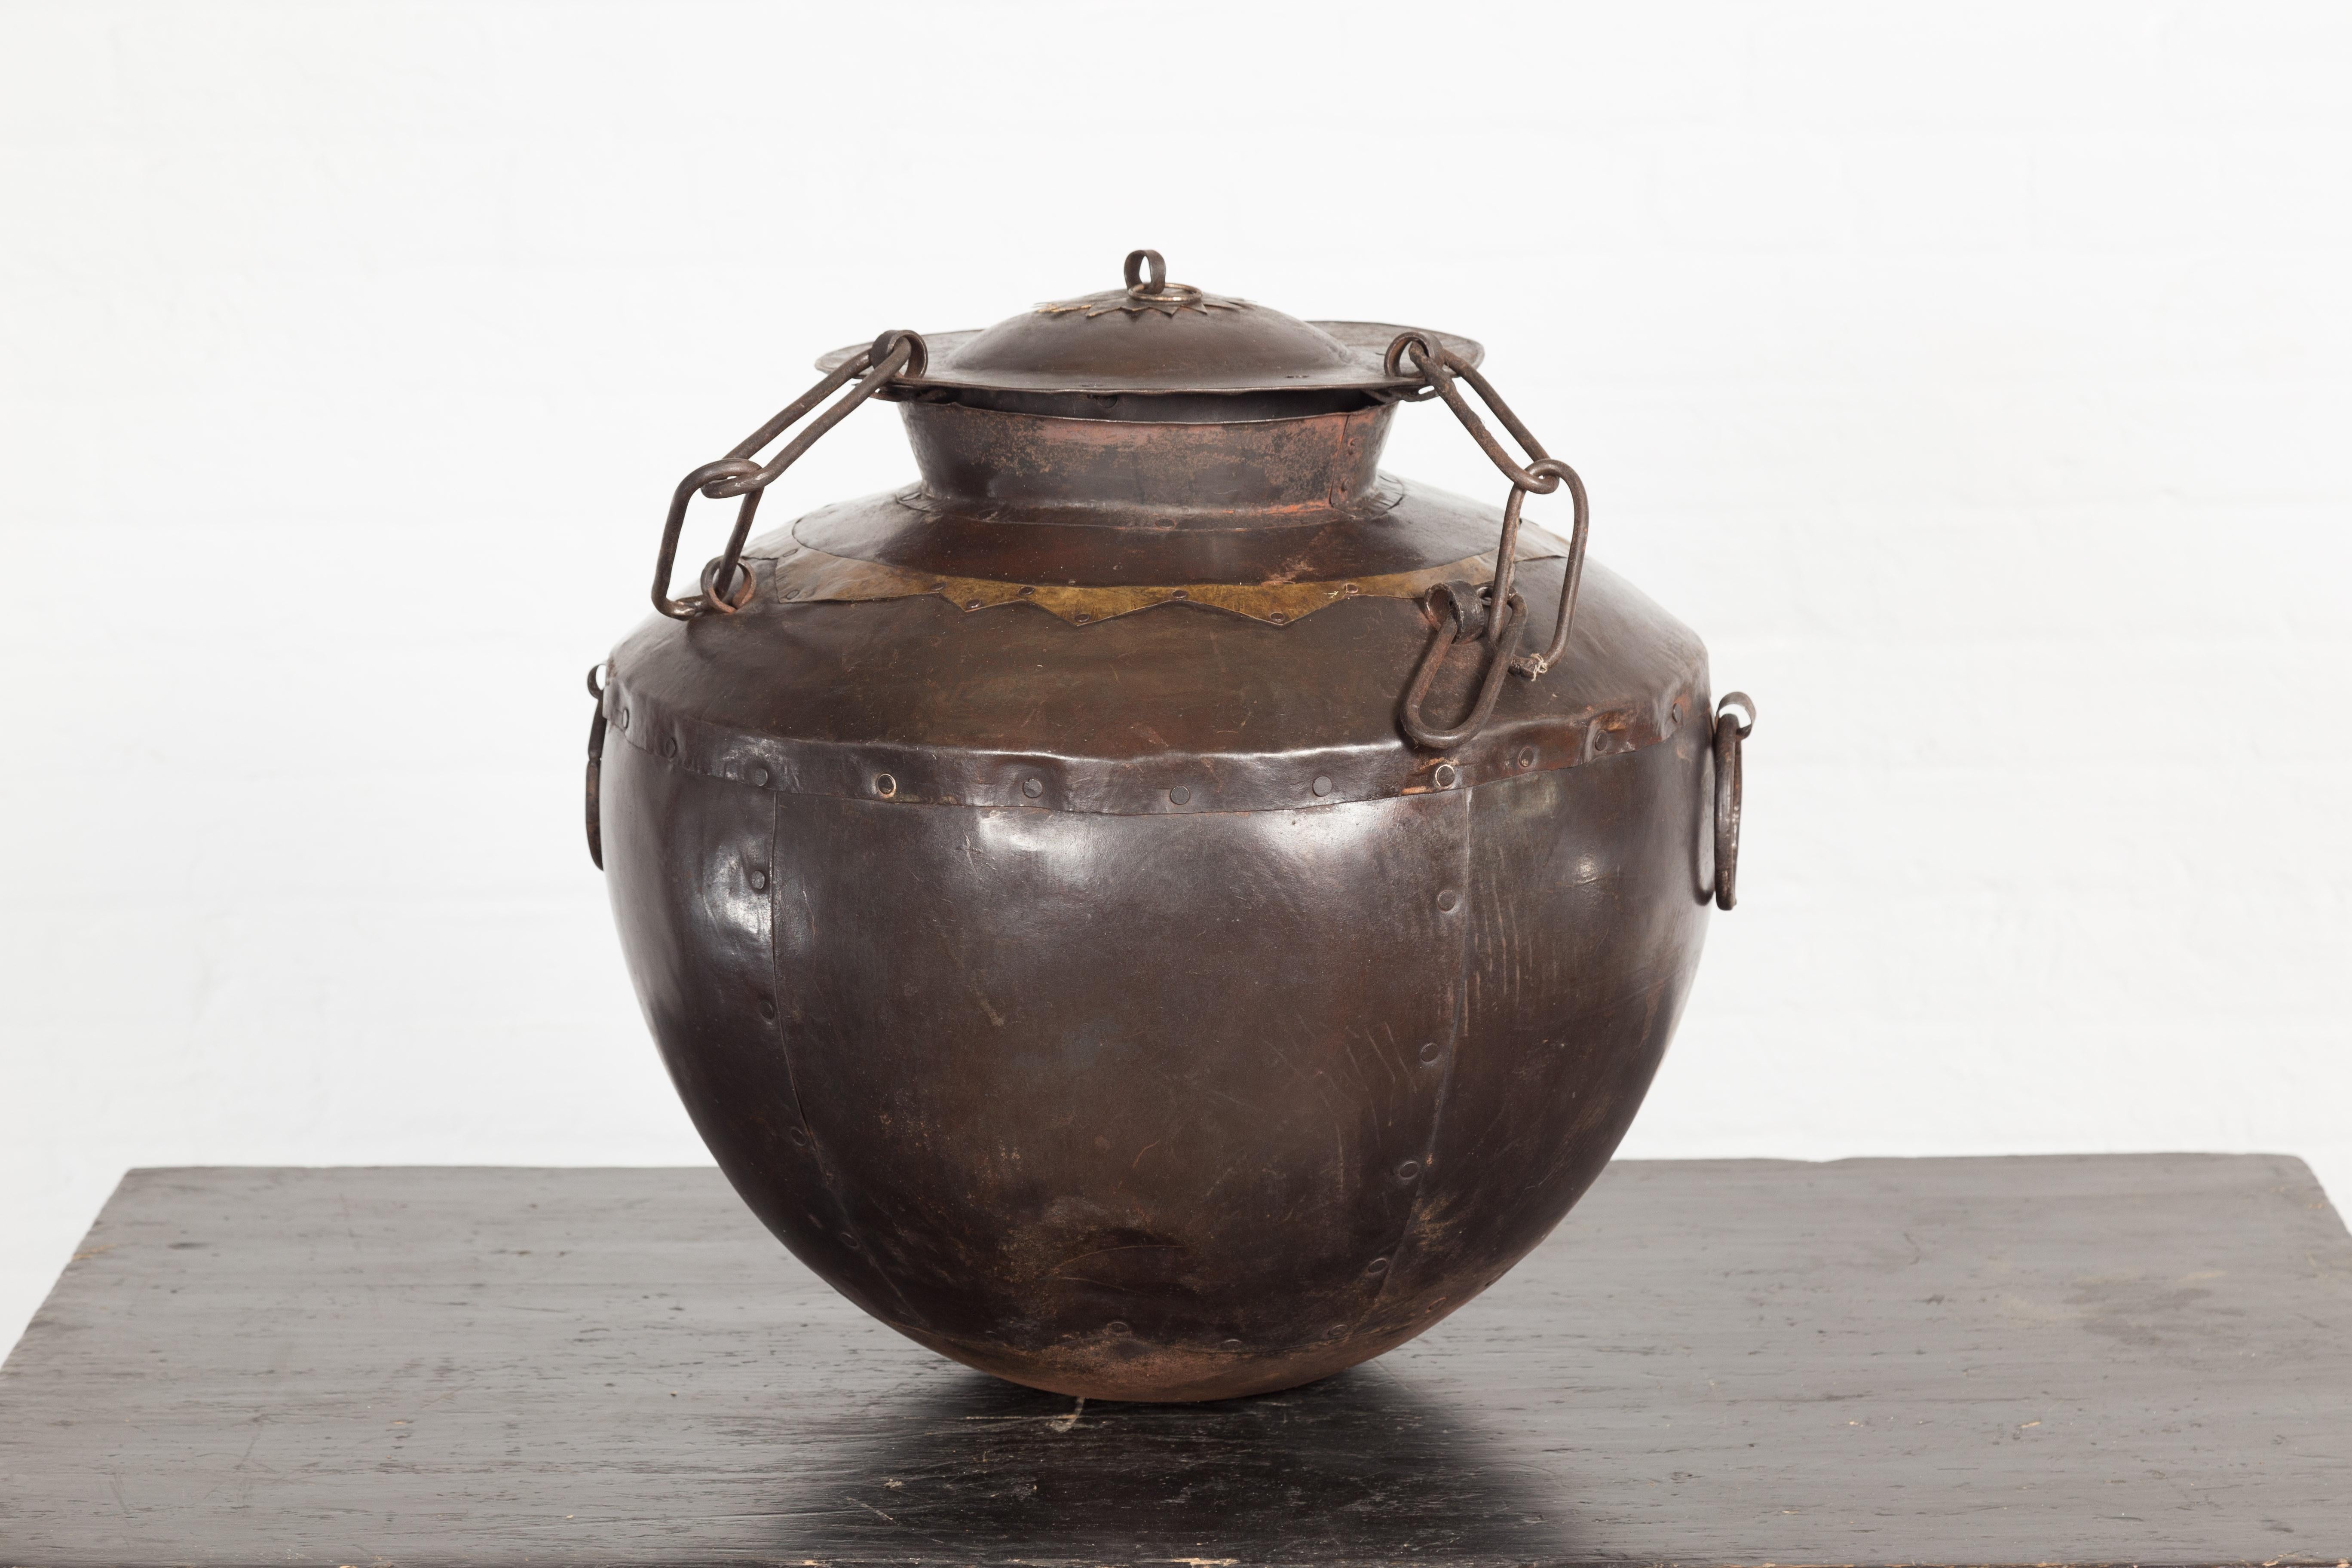 An antique Indian iron lidded water vessel from the 19th century with brass geometric accents and tapering lines. This alluring antique Indian iron lidded water vessel from the 19th century is a captivating blend of history, craftsmanship, and